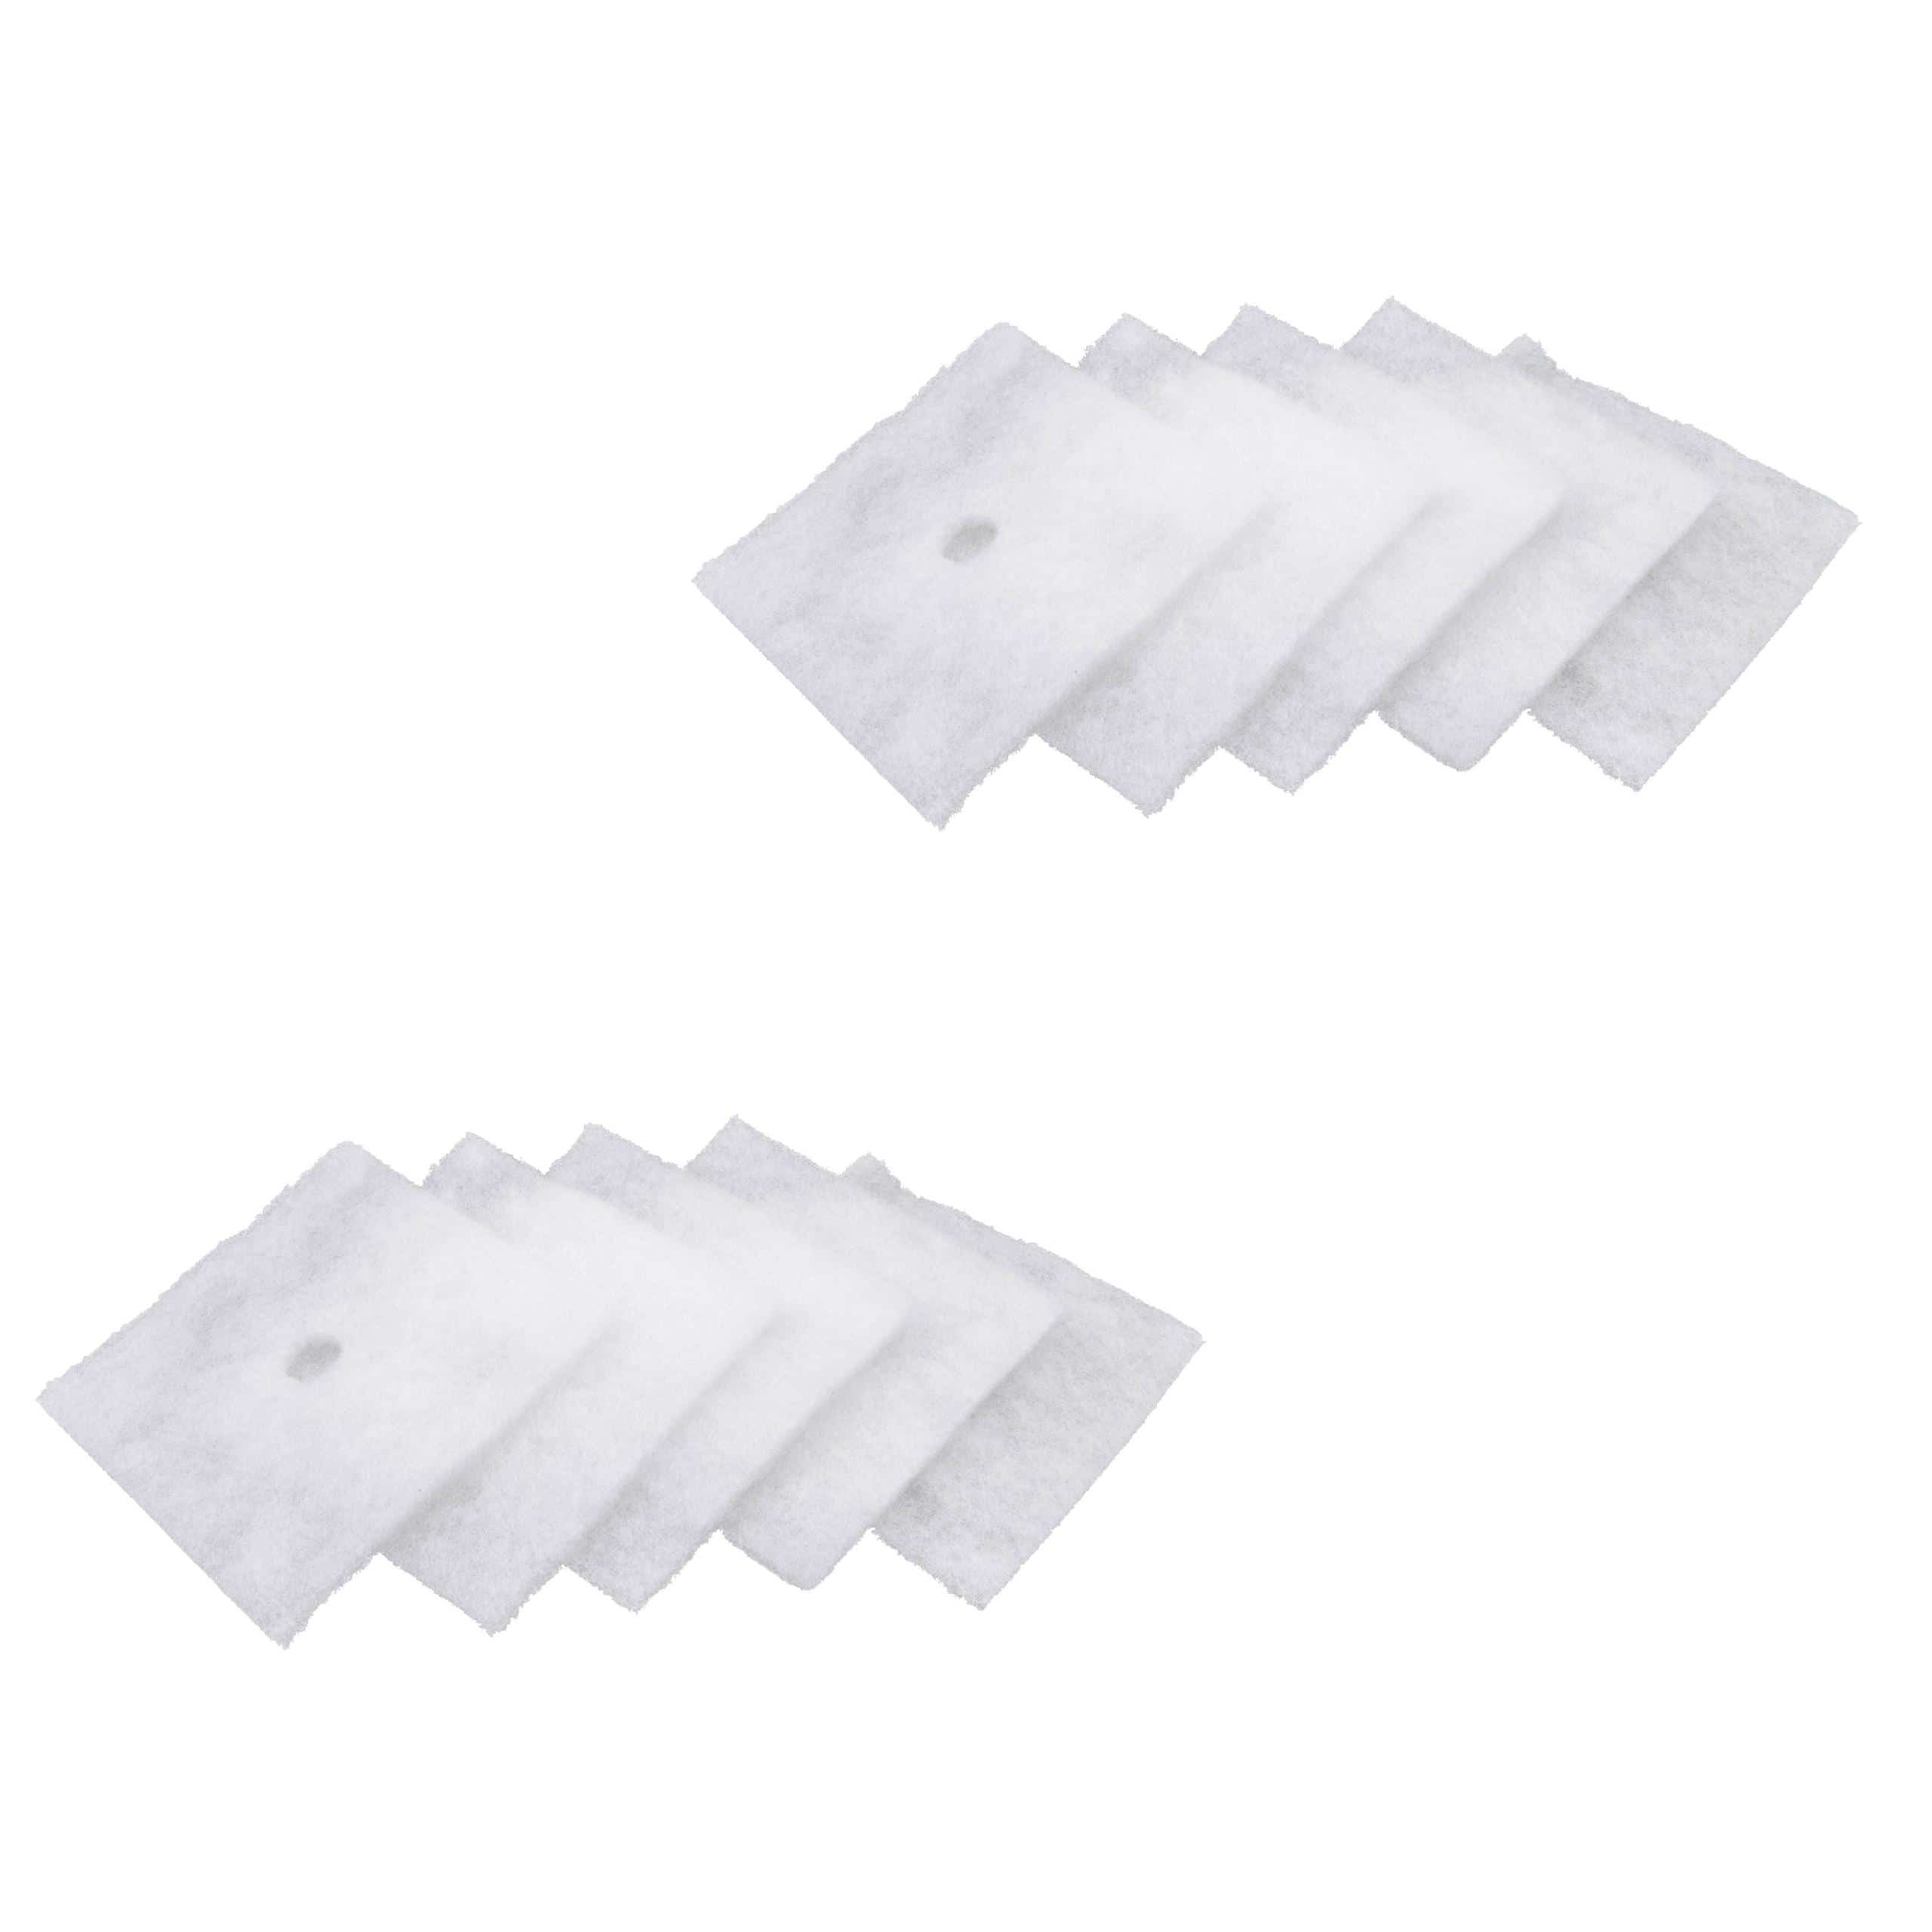 Air Filter Set Replacement for Maico ZF 60 / 100, 0093.0680 for Ventilation Devices -